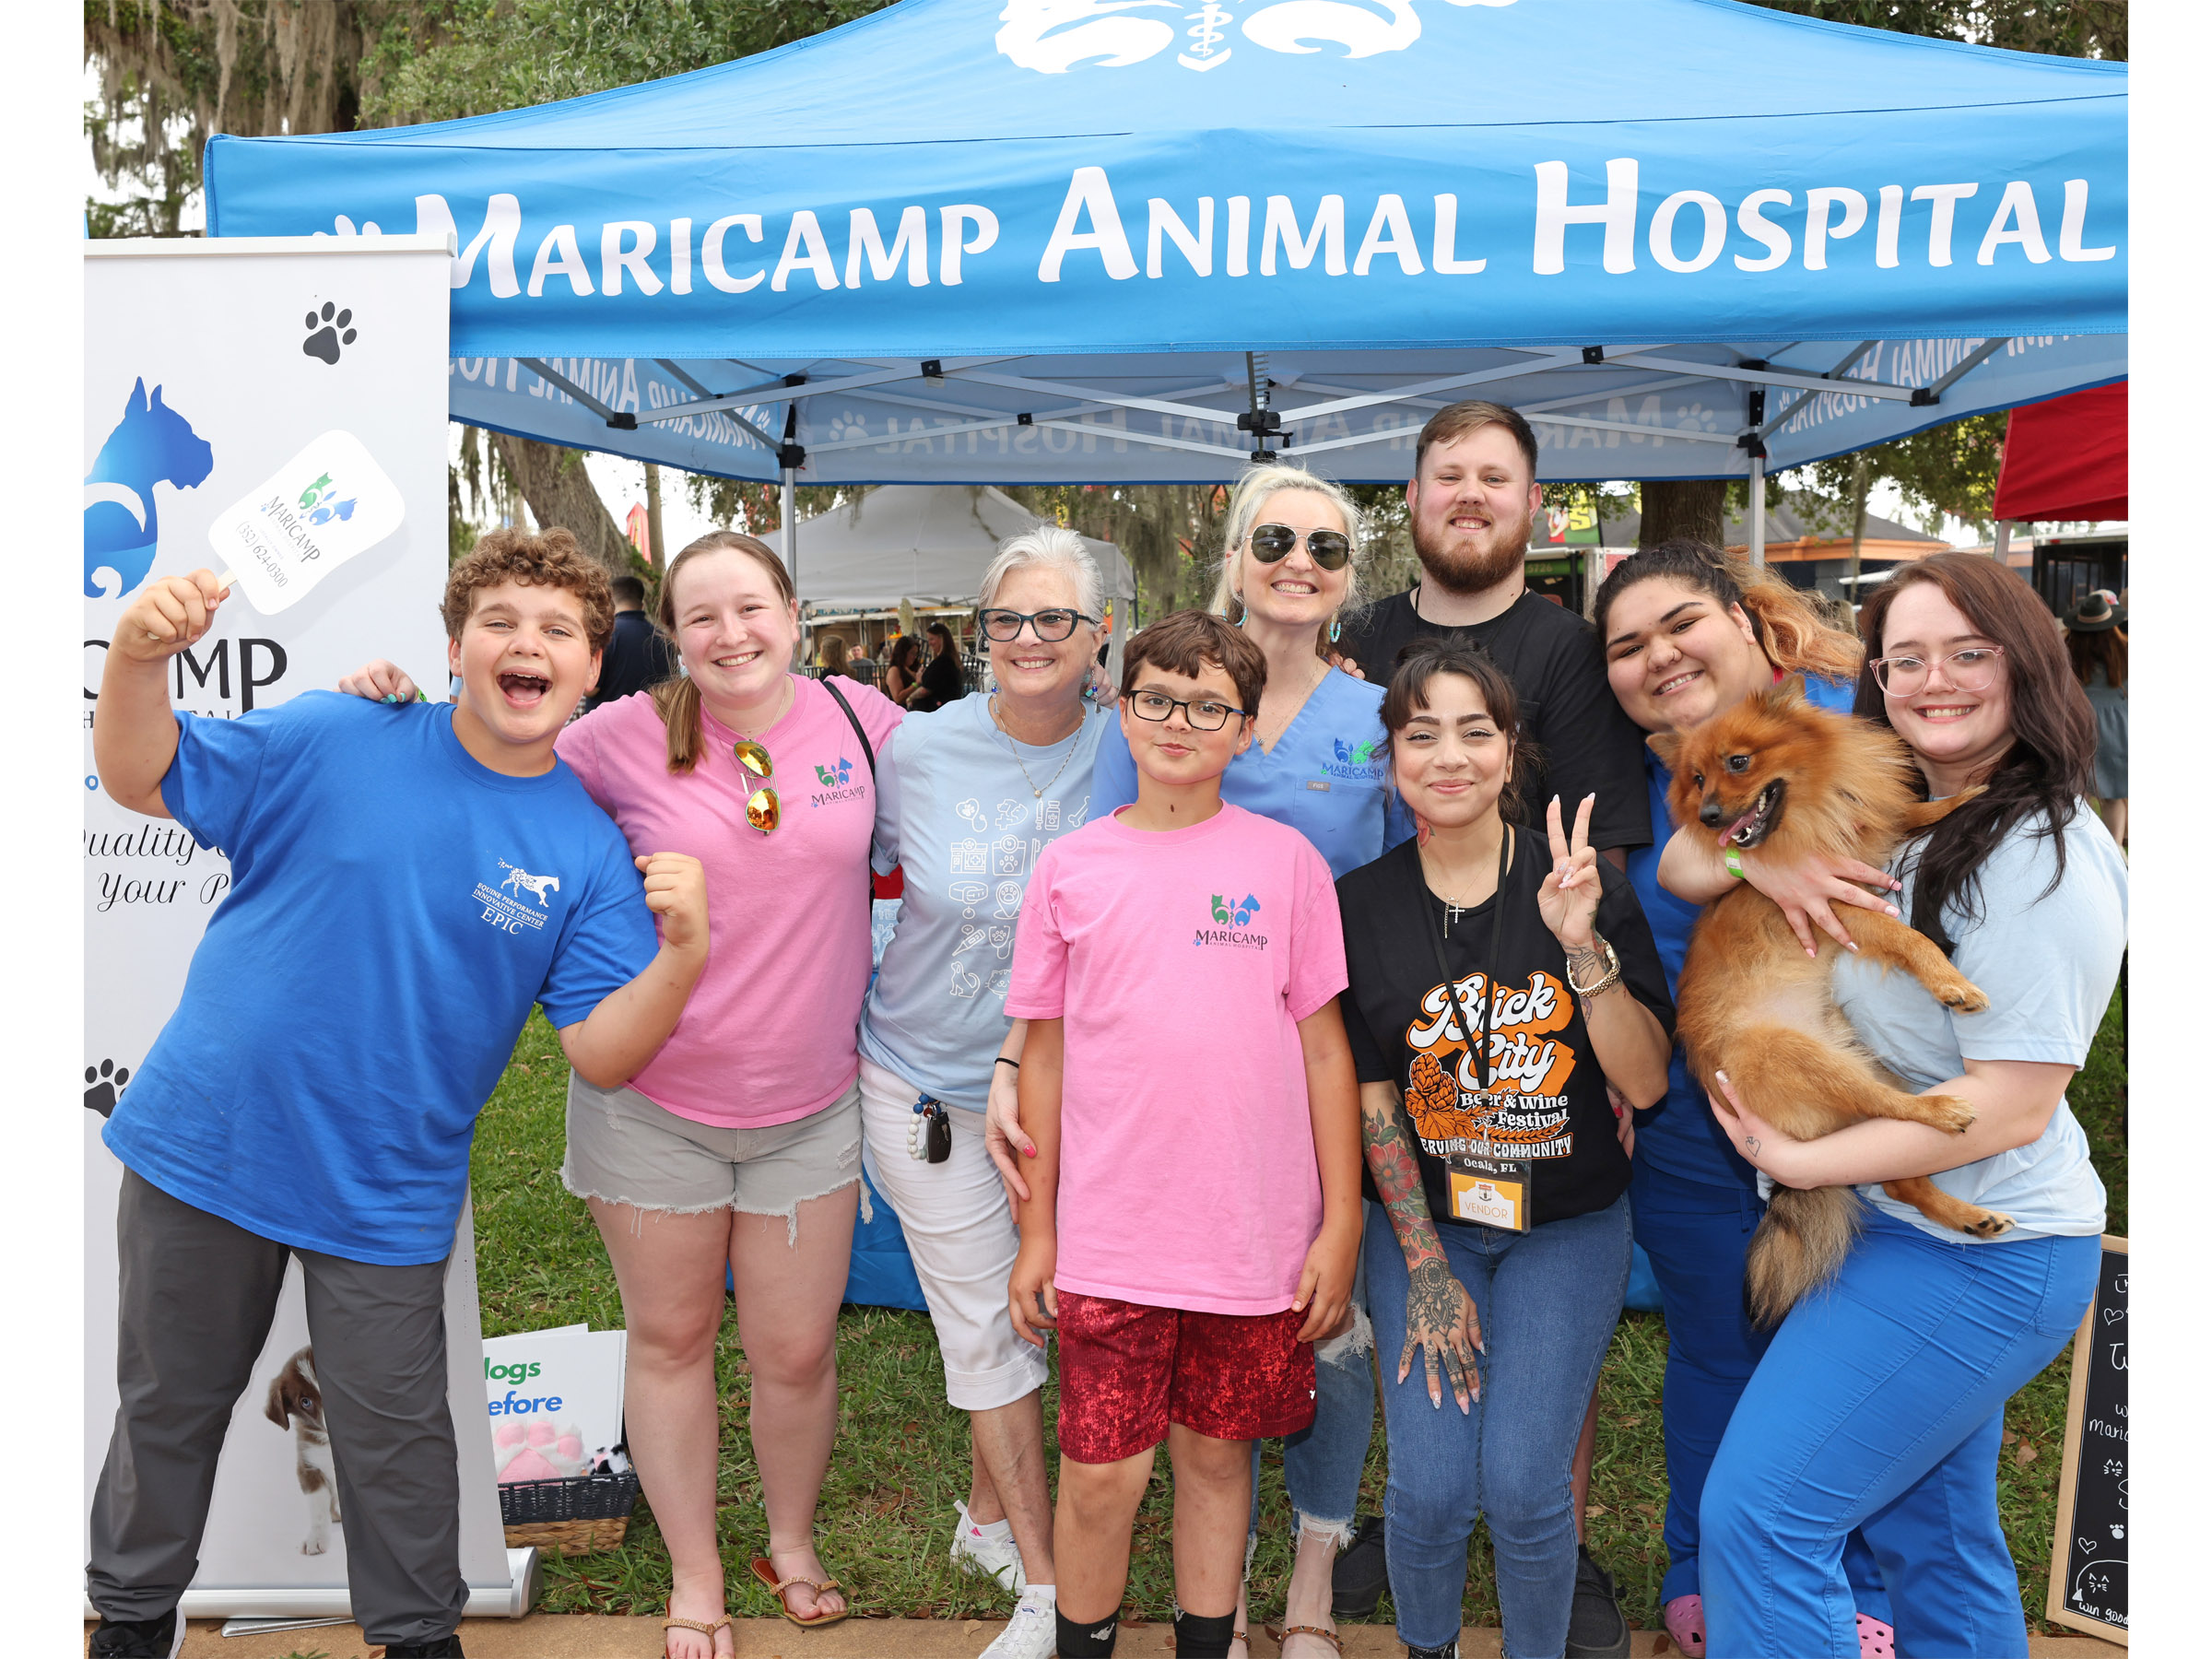 Dr. Katherine O’Brien and other members of the Maricamp Animal Hospital team